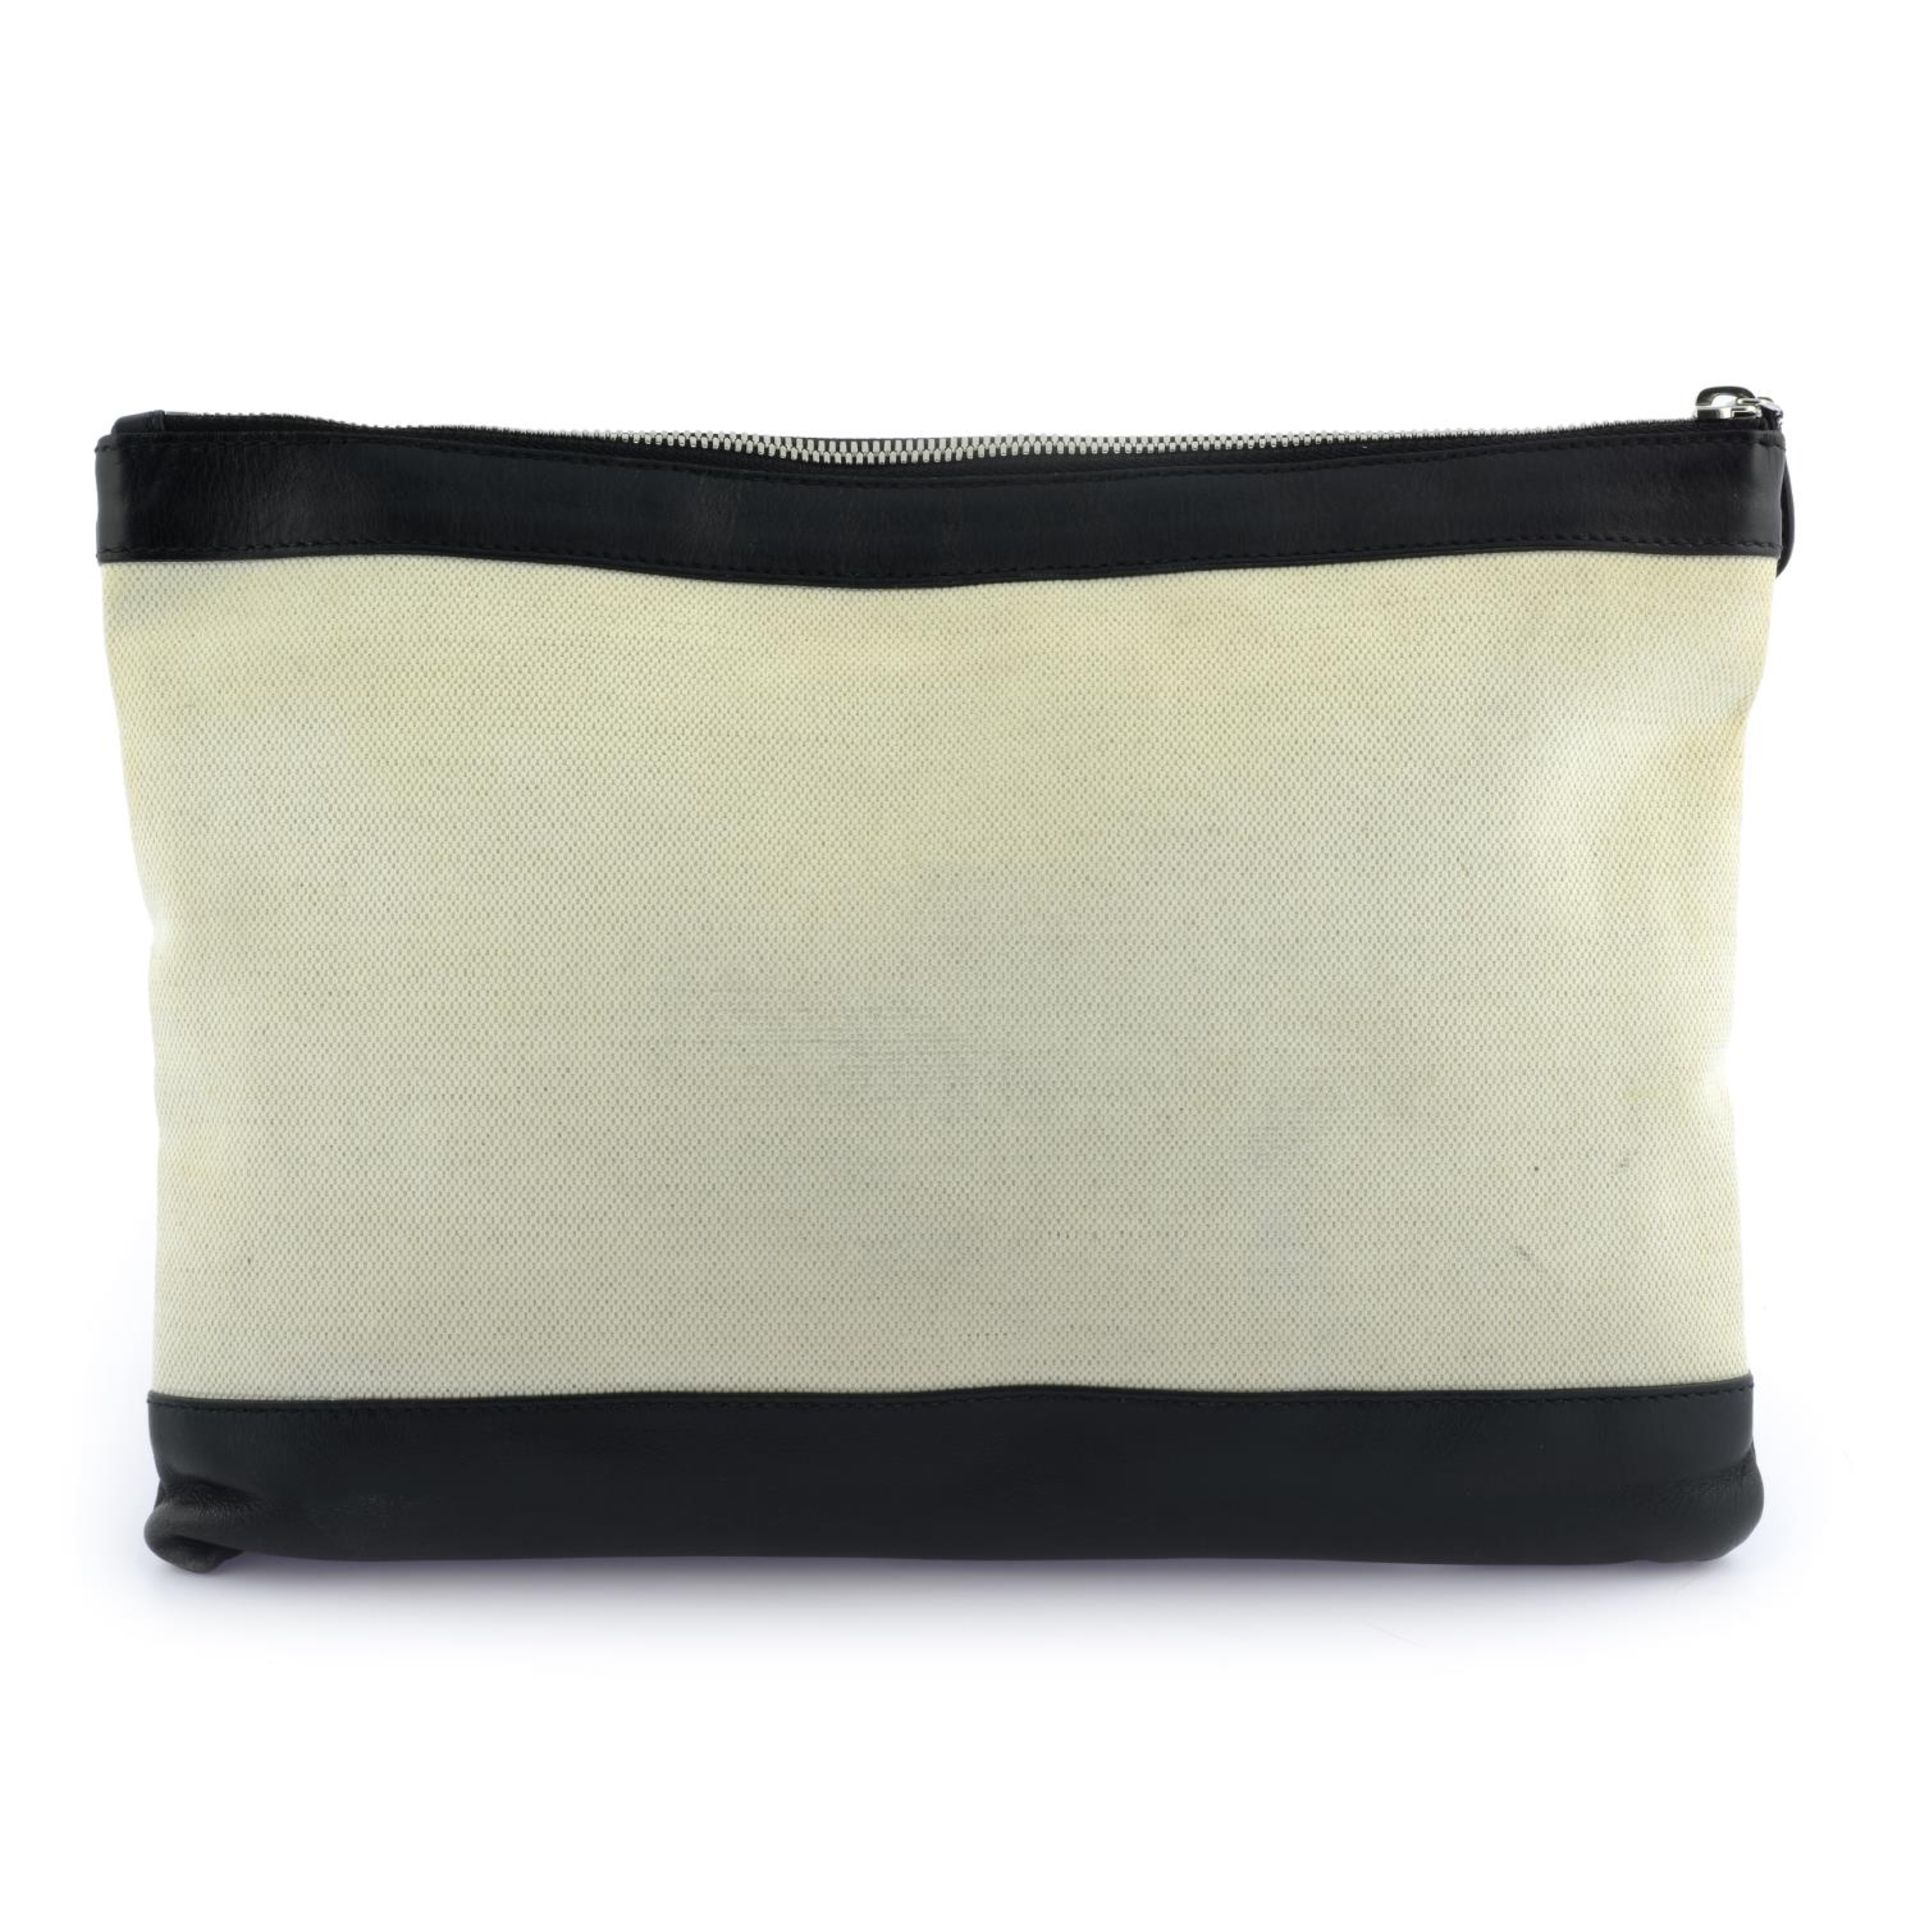 BALENCIAGA - a canvas and leather clutch. - Image 2 of 6